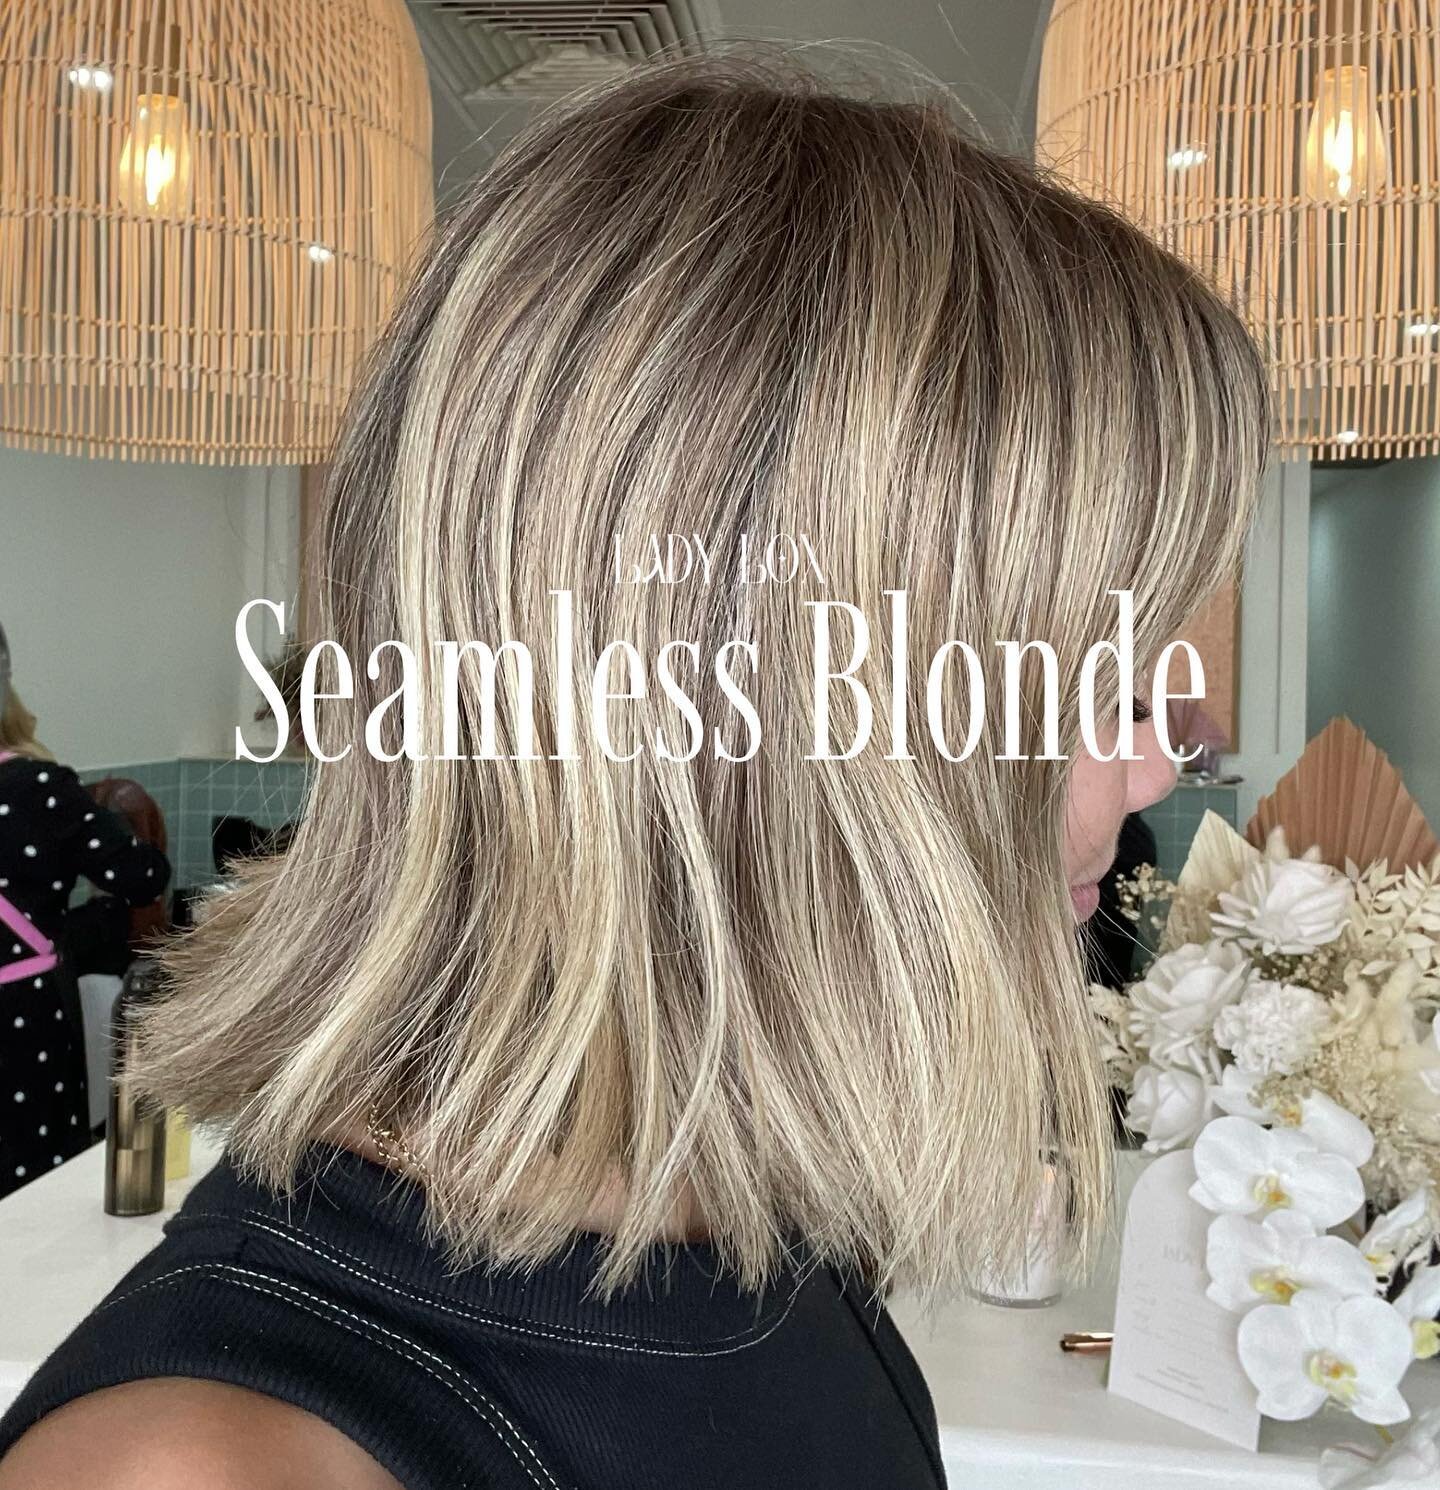 We 💘 A Seamless Blonde 

No harsh regrowth lines here! Creating the perfect balance of a dimensional blonde colour whilst avoiding the obvious regrowth lines and upkeep of regular foiling appointments ✨ Hello Low maintenance 

Hair by @emily_ladylox